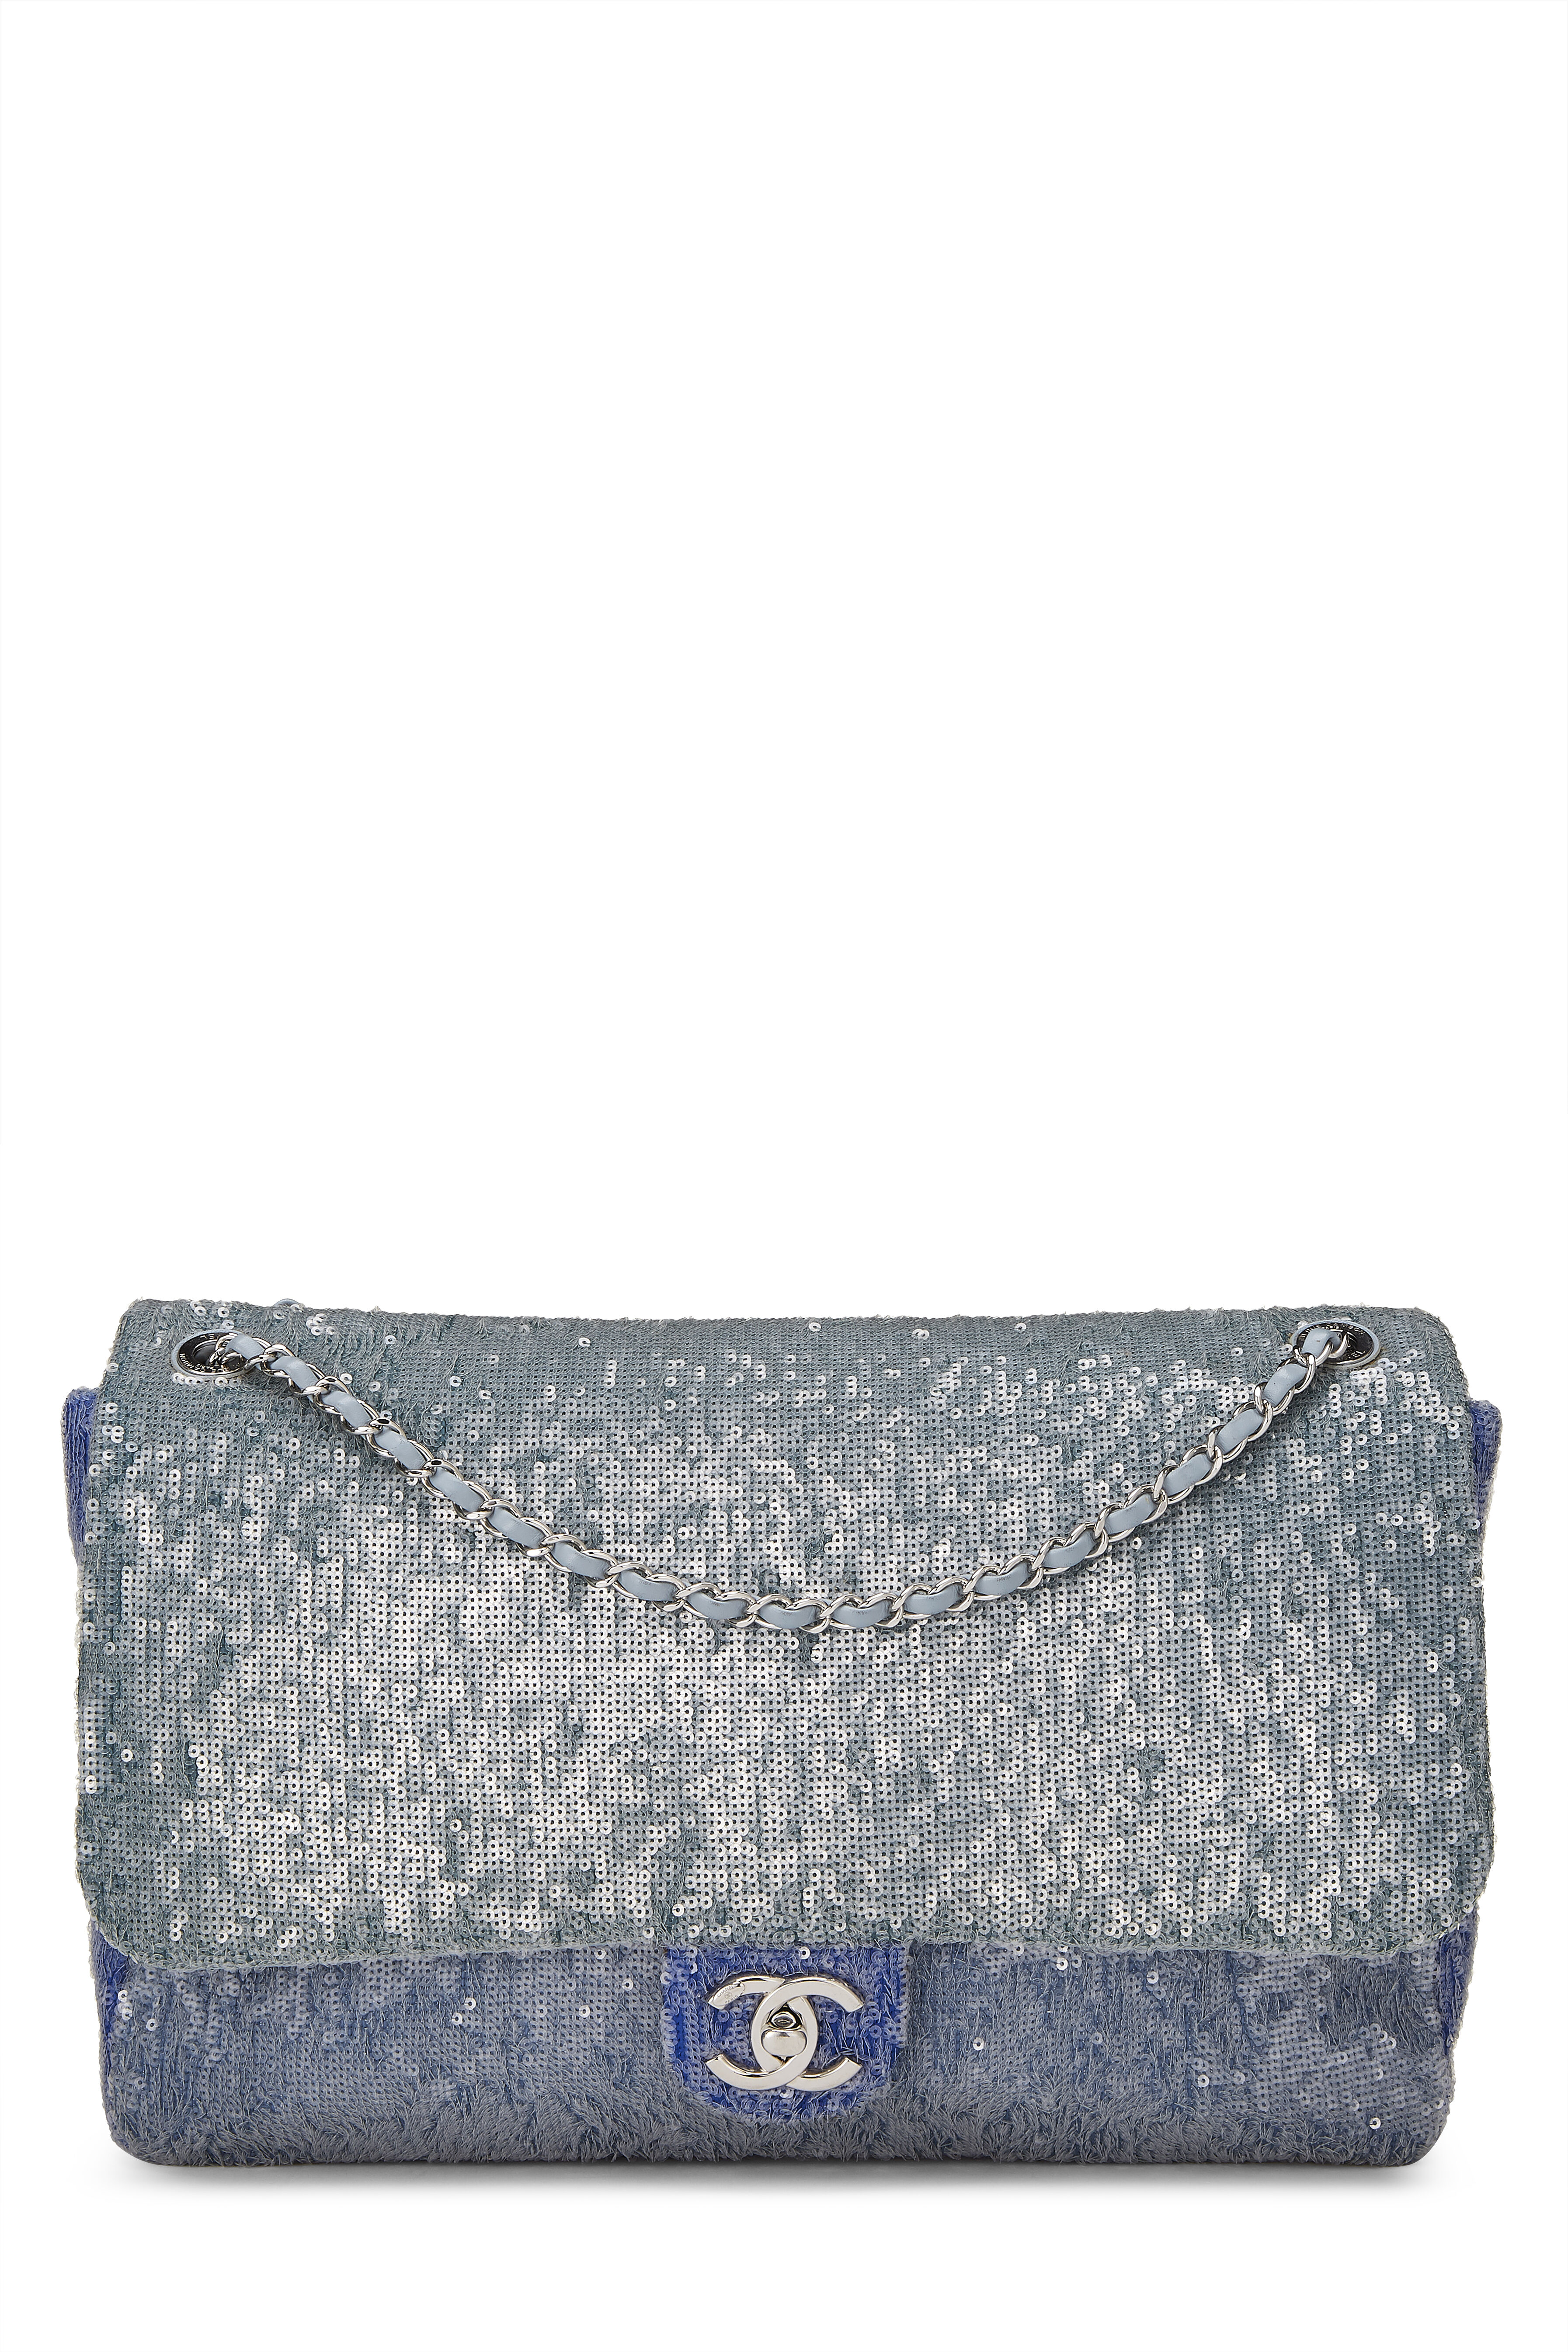 A RUNWAY BLUE WATERFALL SEQUIN JUMBO SINGLE FLAP BAG WITH SILVER